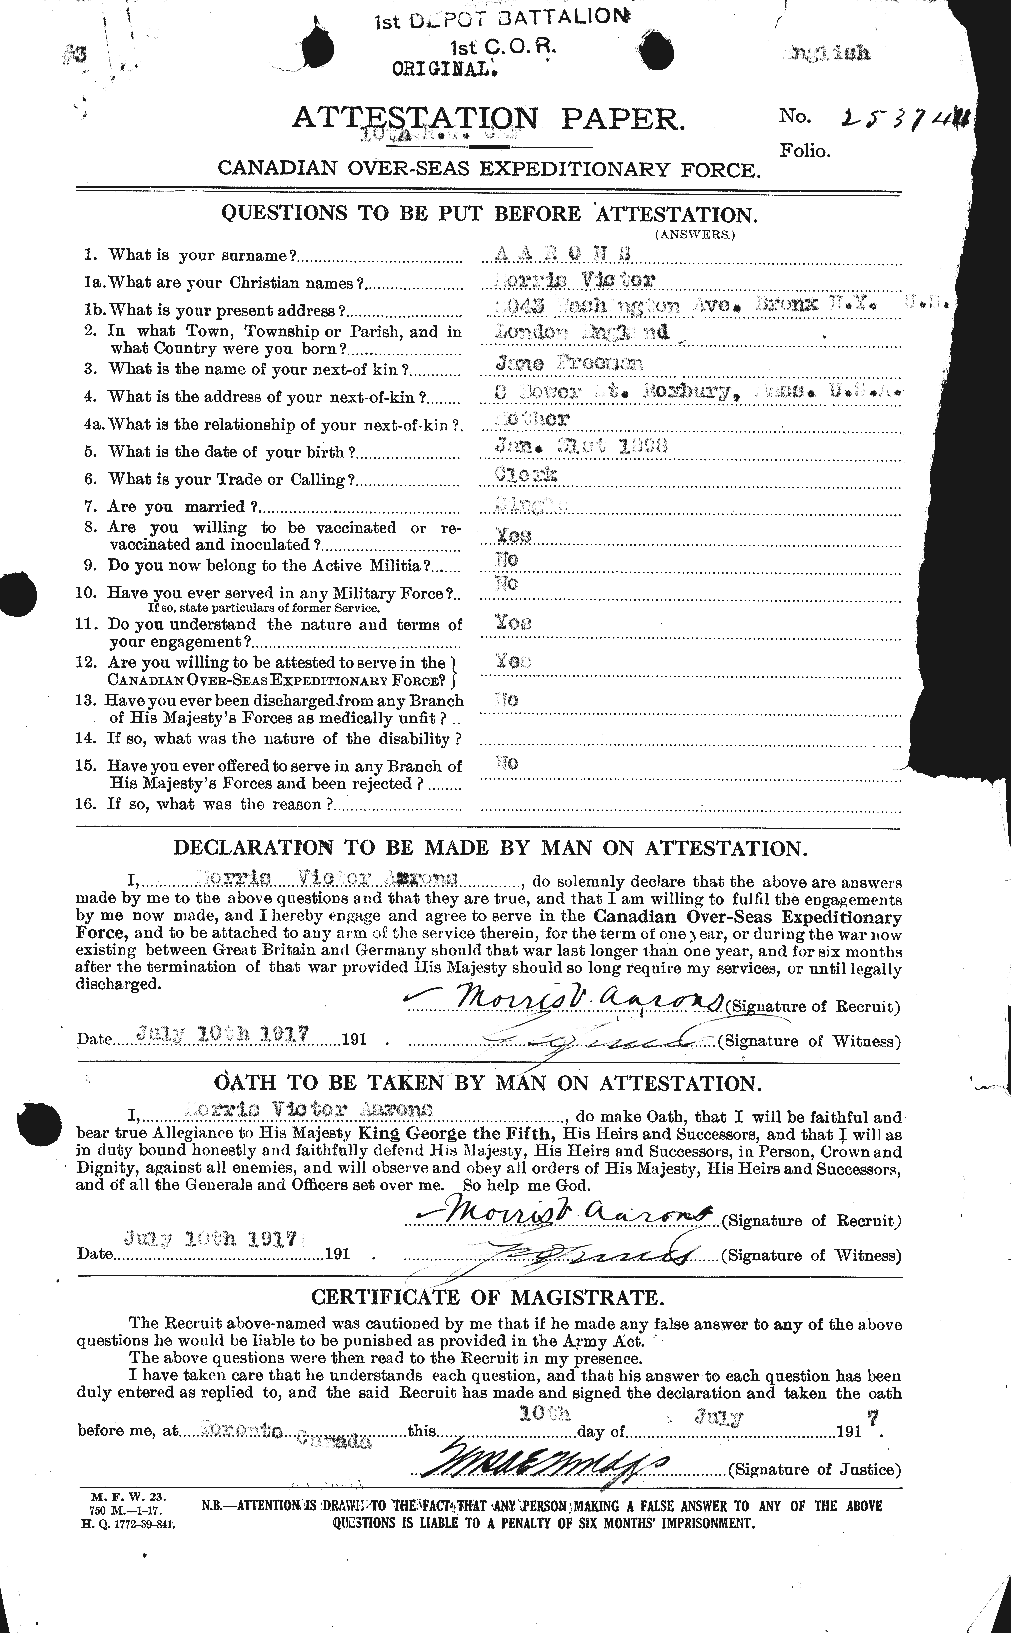 Personnel Records of the First World War - CEF 200746a